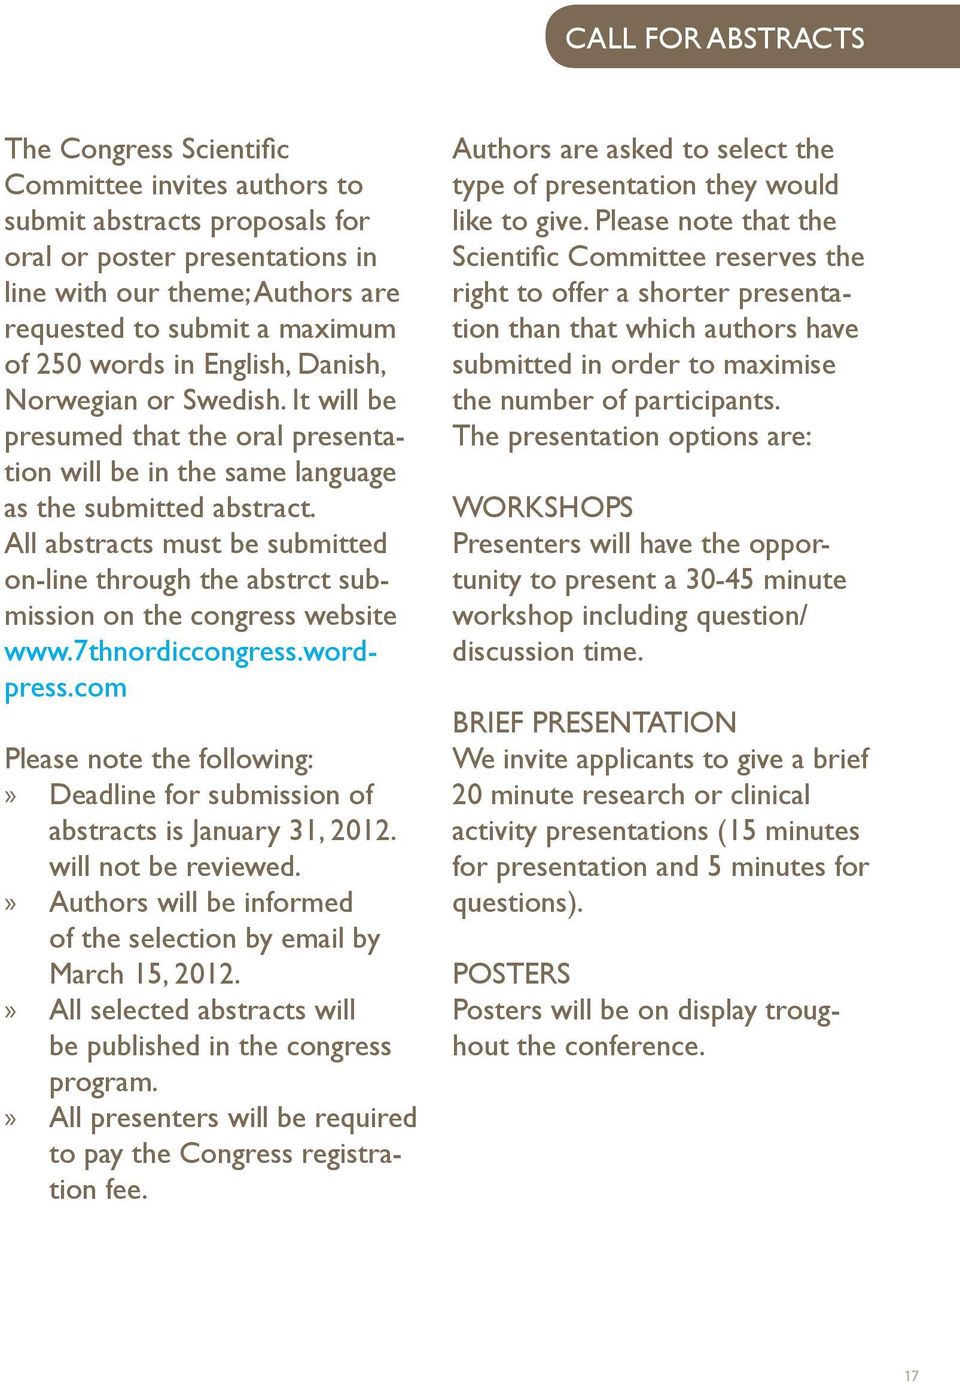 All abstracts must be submitted on-line through the abstrct submission on the congress website www.7thnordiccongress.wordpress.